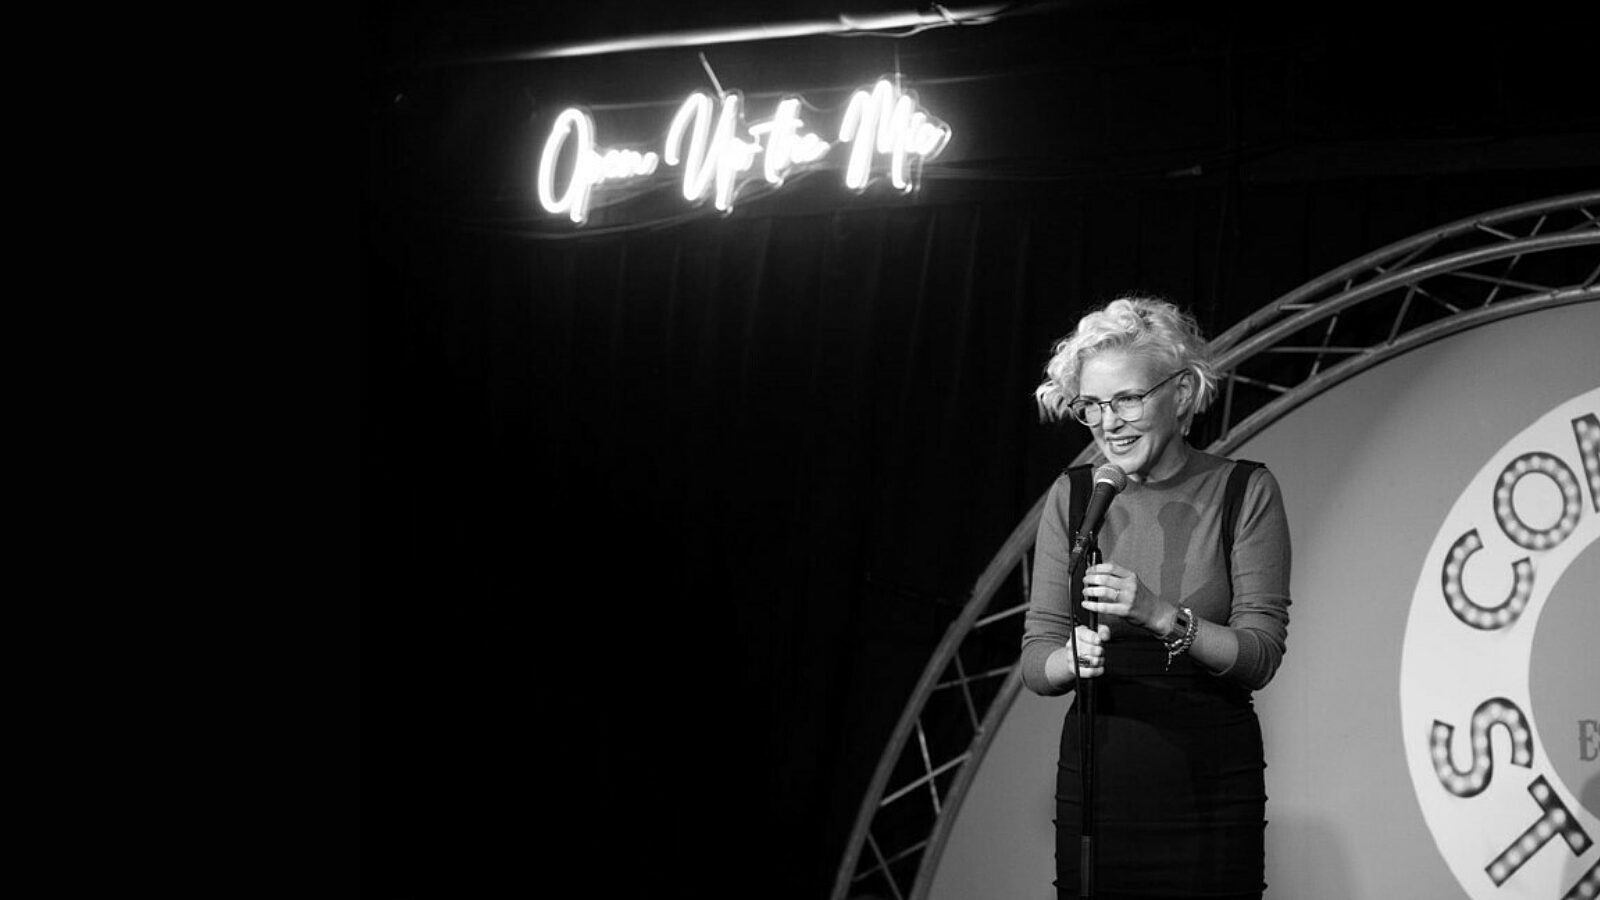 Black & white image of Ruth Cockburn performing at the Comedy Station Comedy Club, Blackpool.